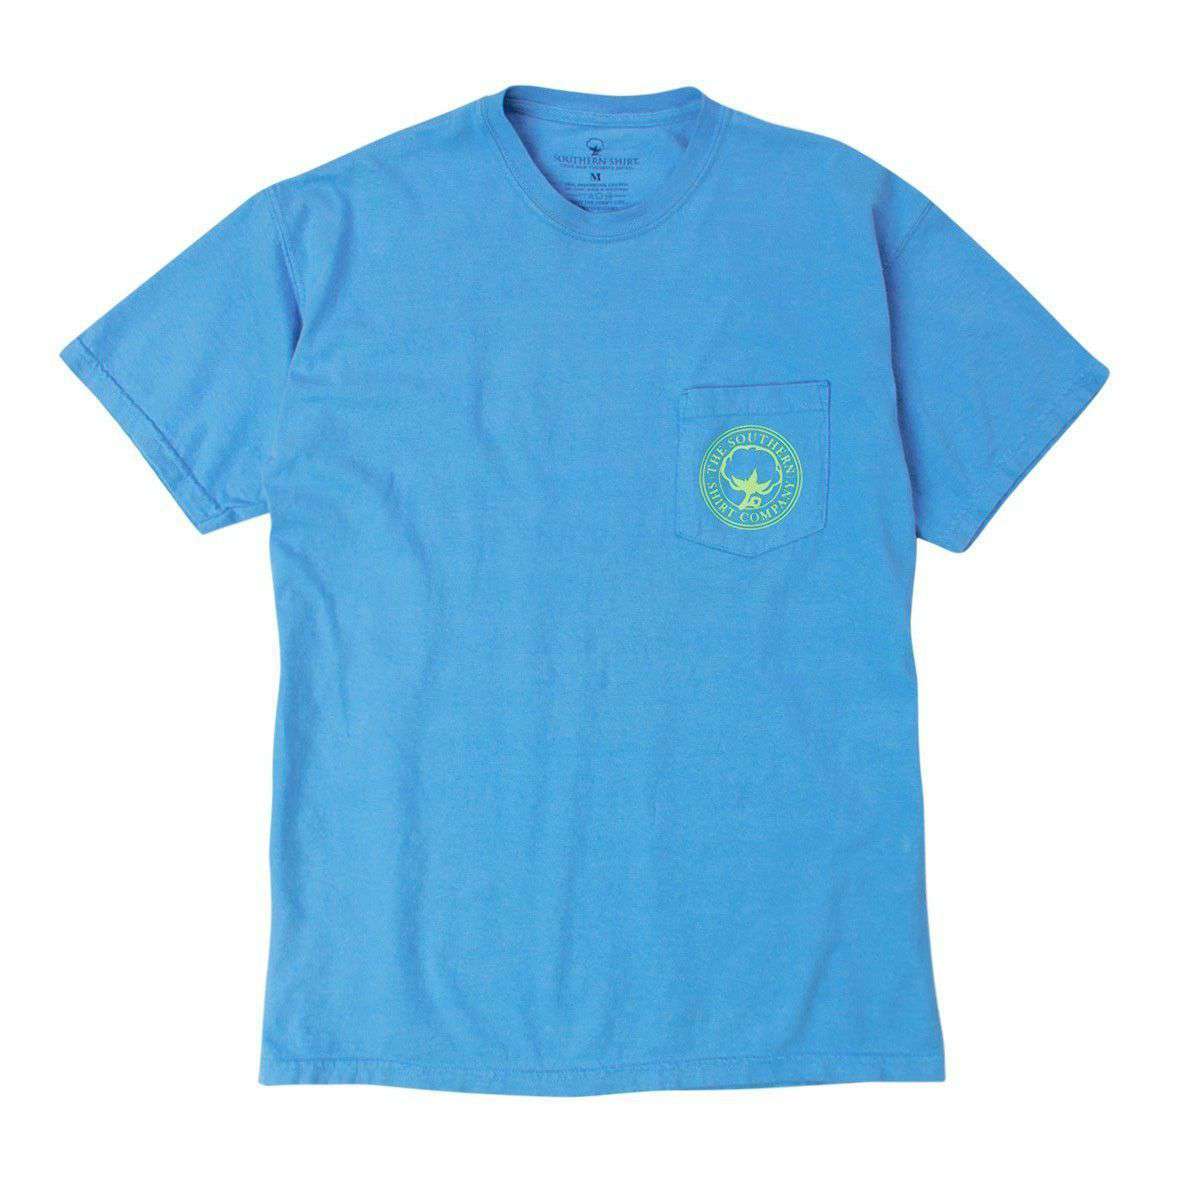 Pineapple Tee Shirt in Bonnie Blue by The Southern Shirt Co. - Country Club Prep